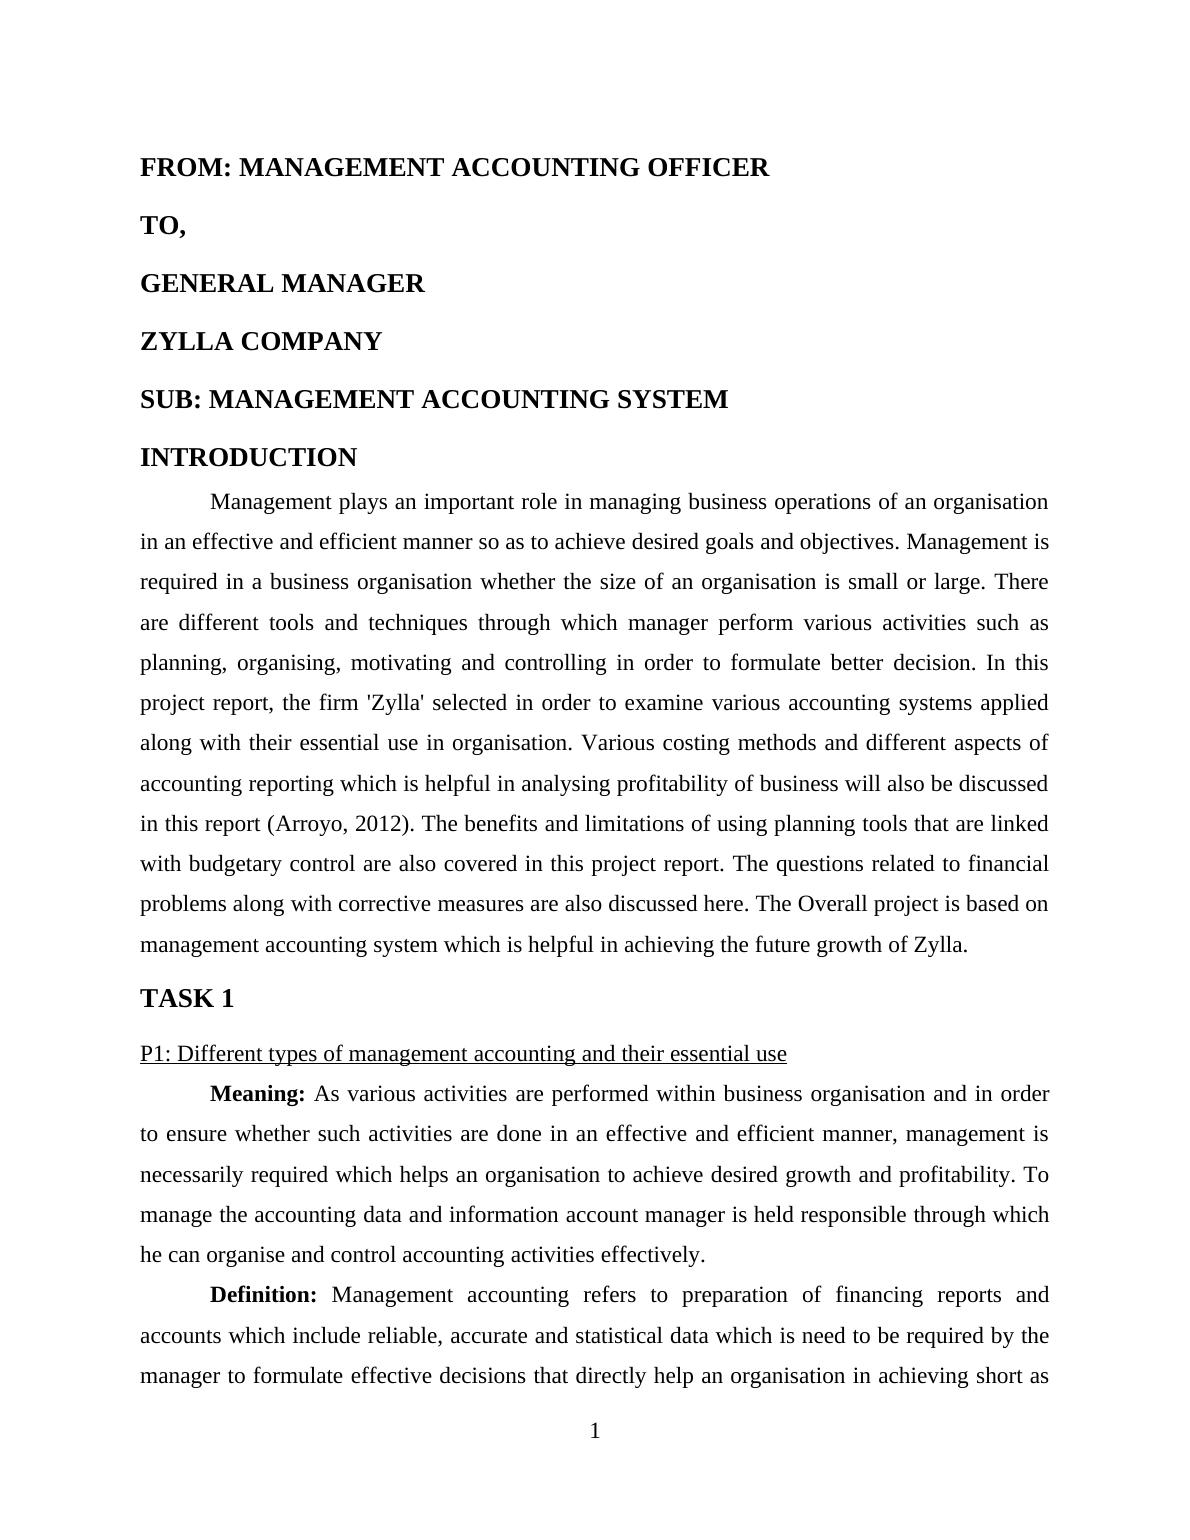 Management Accounting of Zylla Company - Report_3